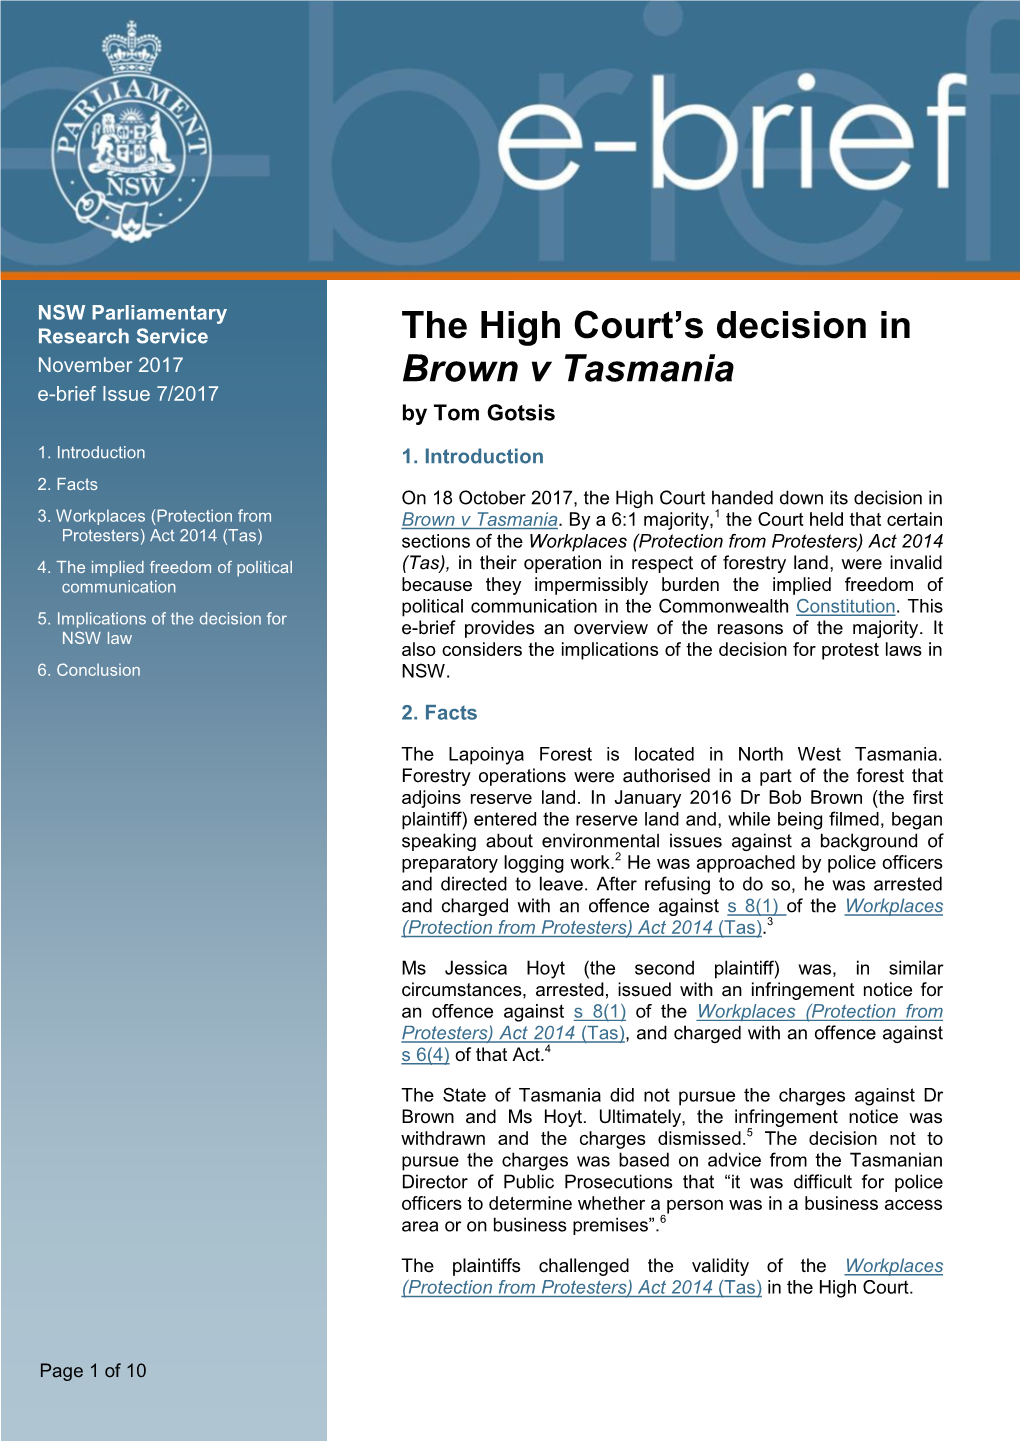 The High Court's Decision in Brown V Tasmania